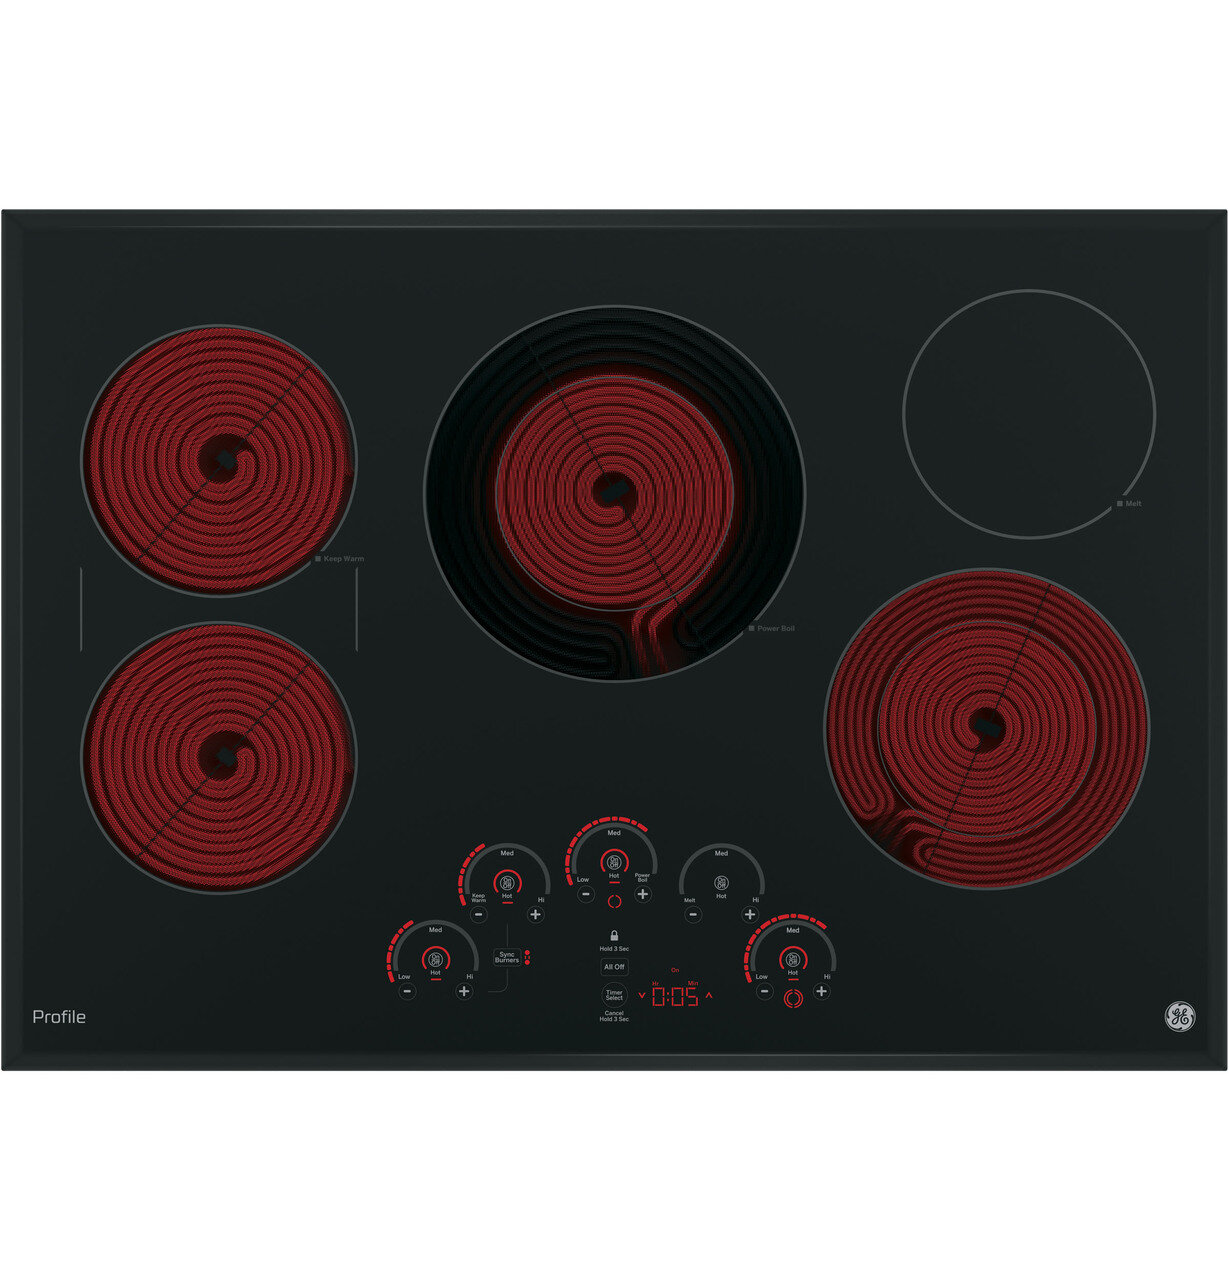 GE Profile 29.75 Electric Cooktop with 5 Burners Finish: Stainless Steel PP9030SJSS